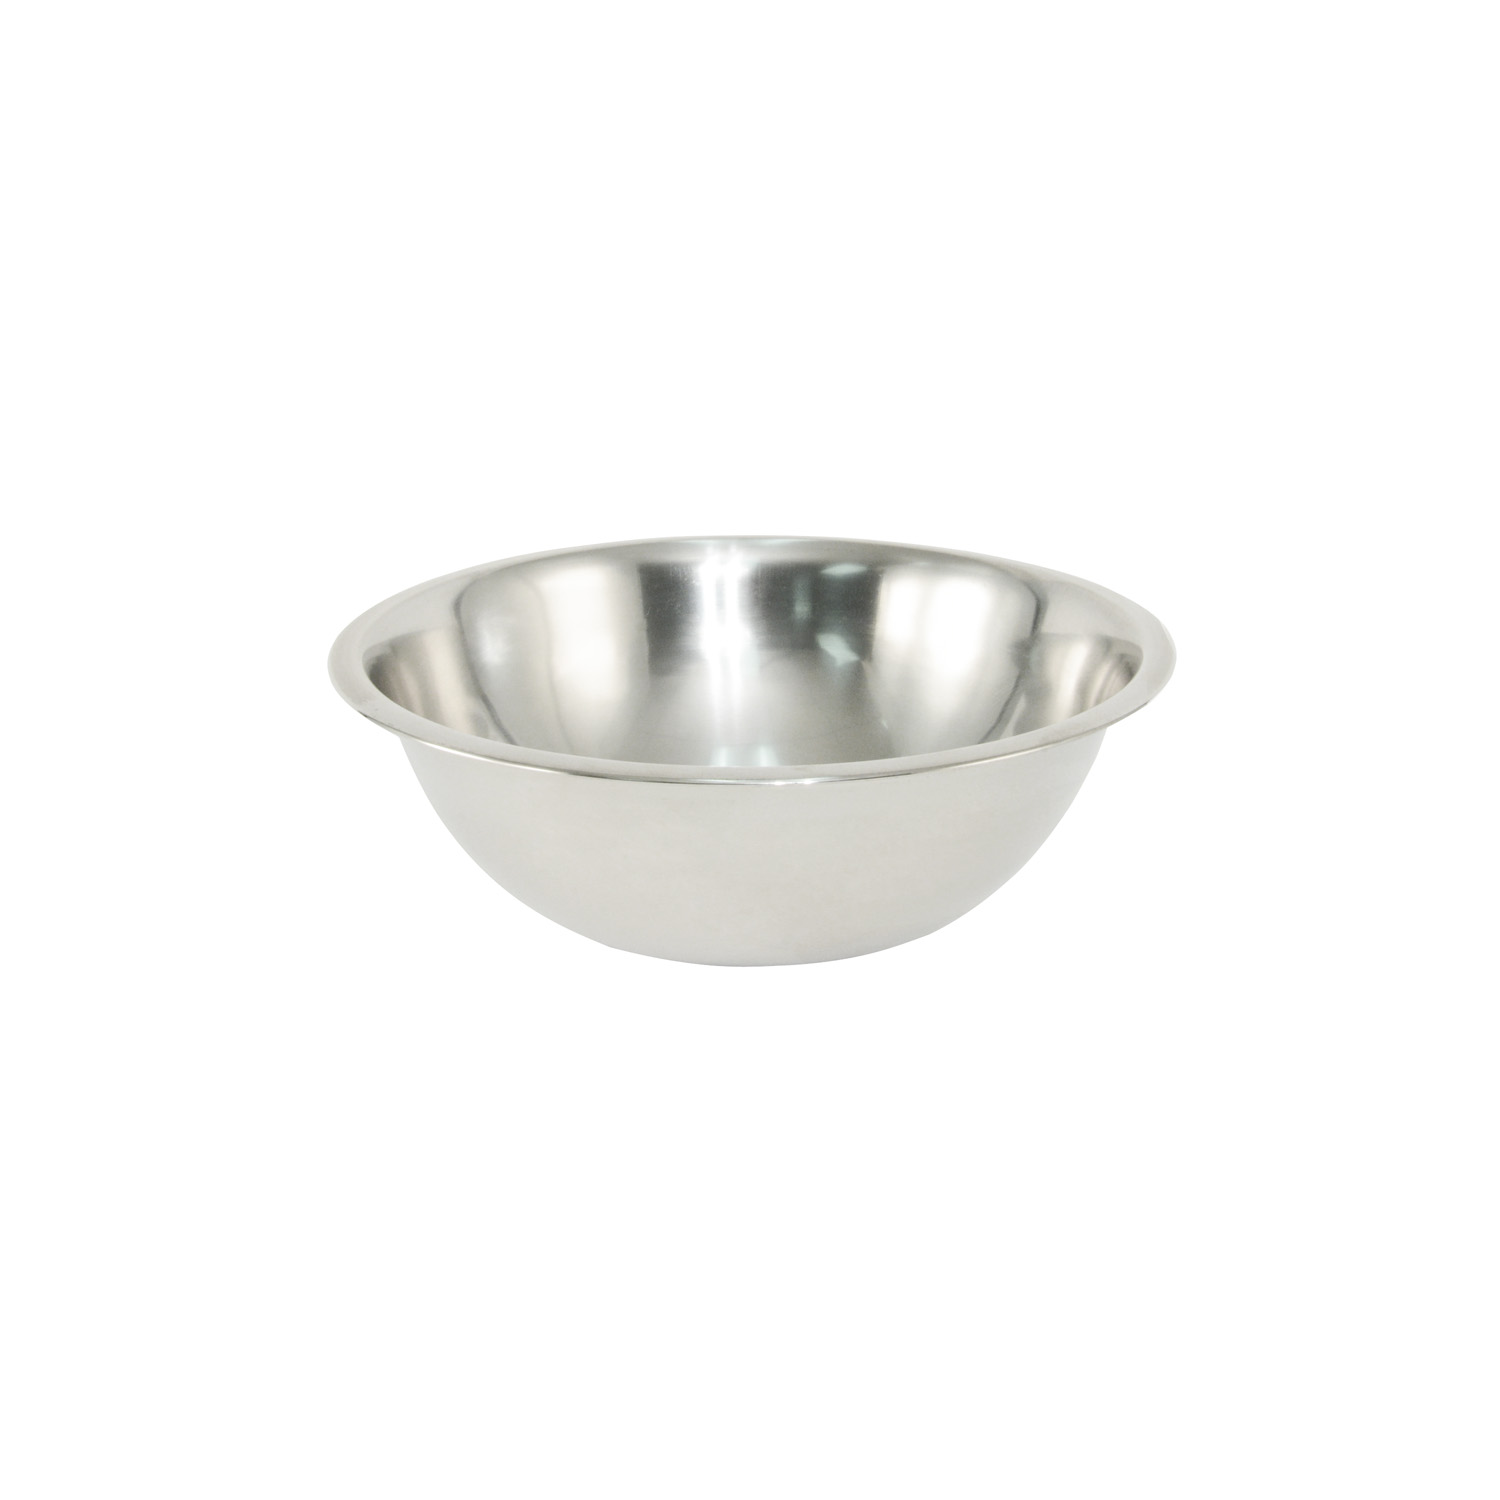 CAC China SMXB-4-150 Economy Stainless Steel Mixing Bowl 1.5 Qt.